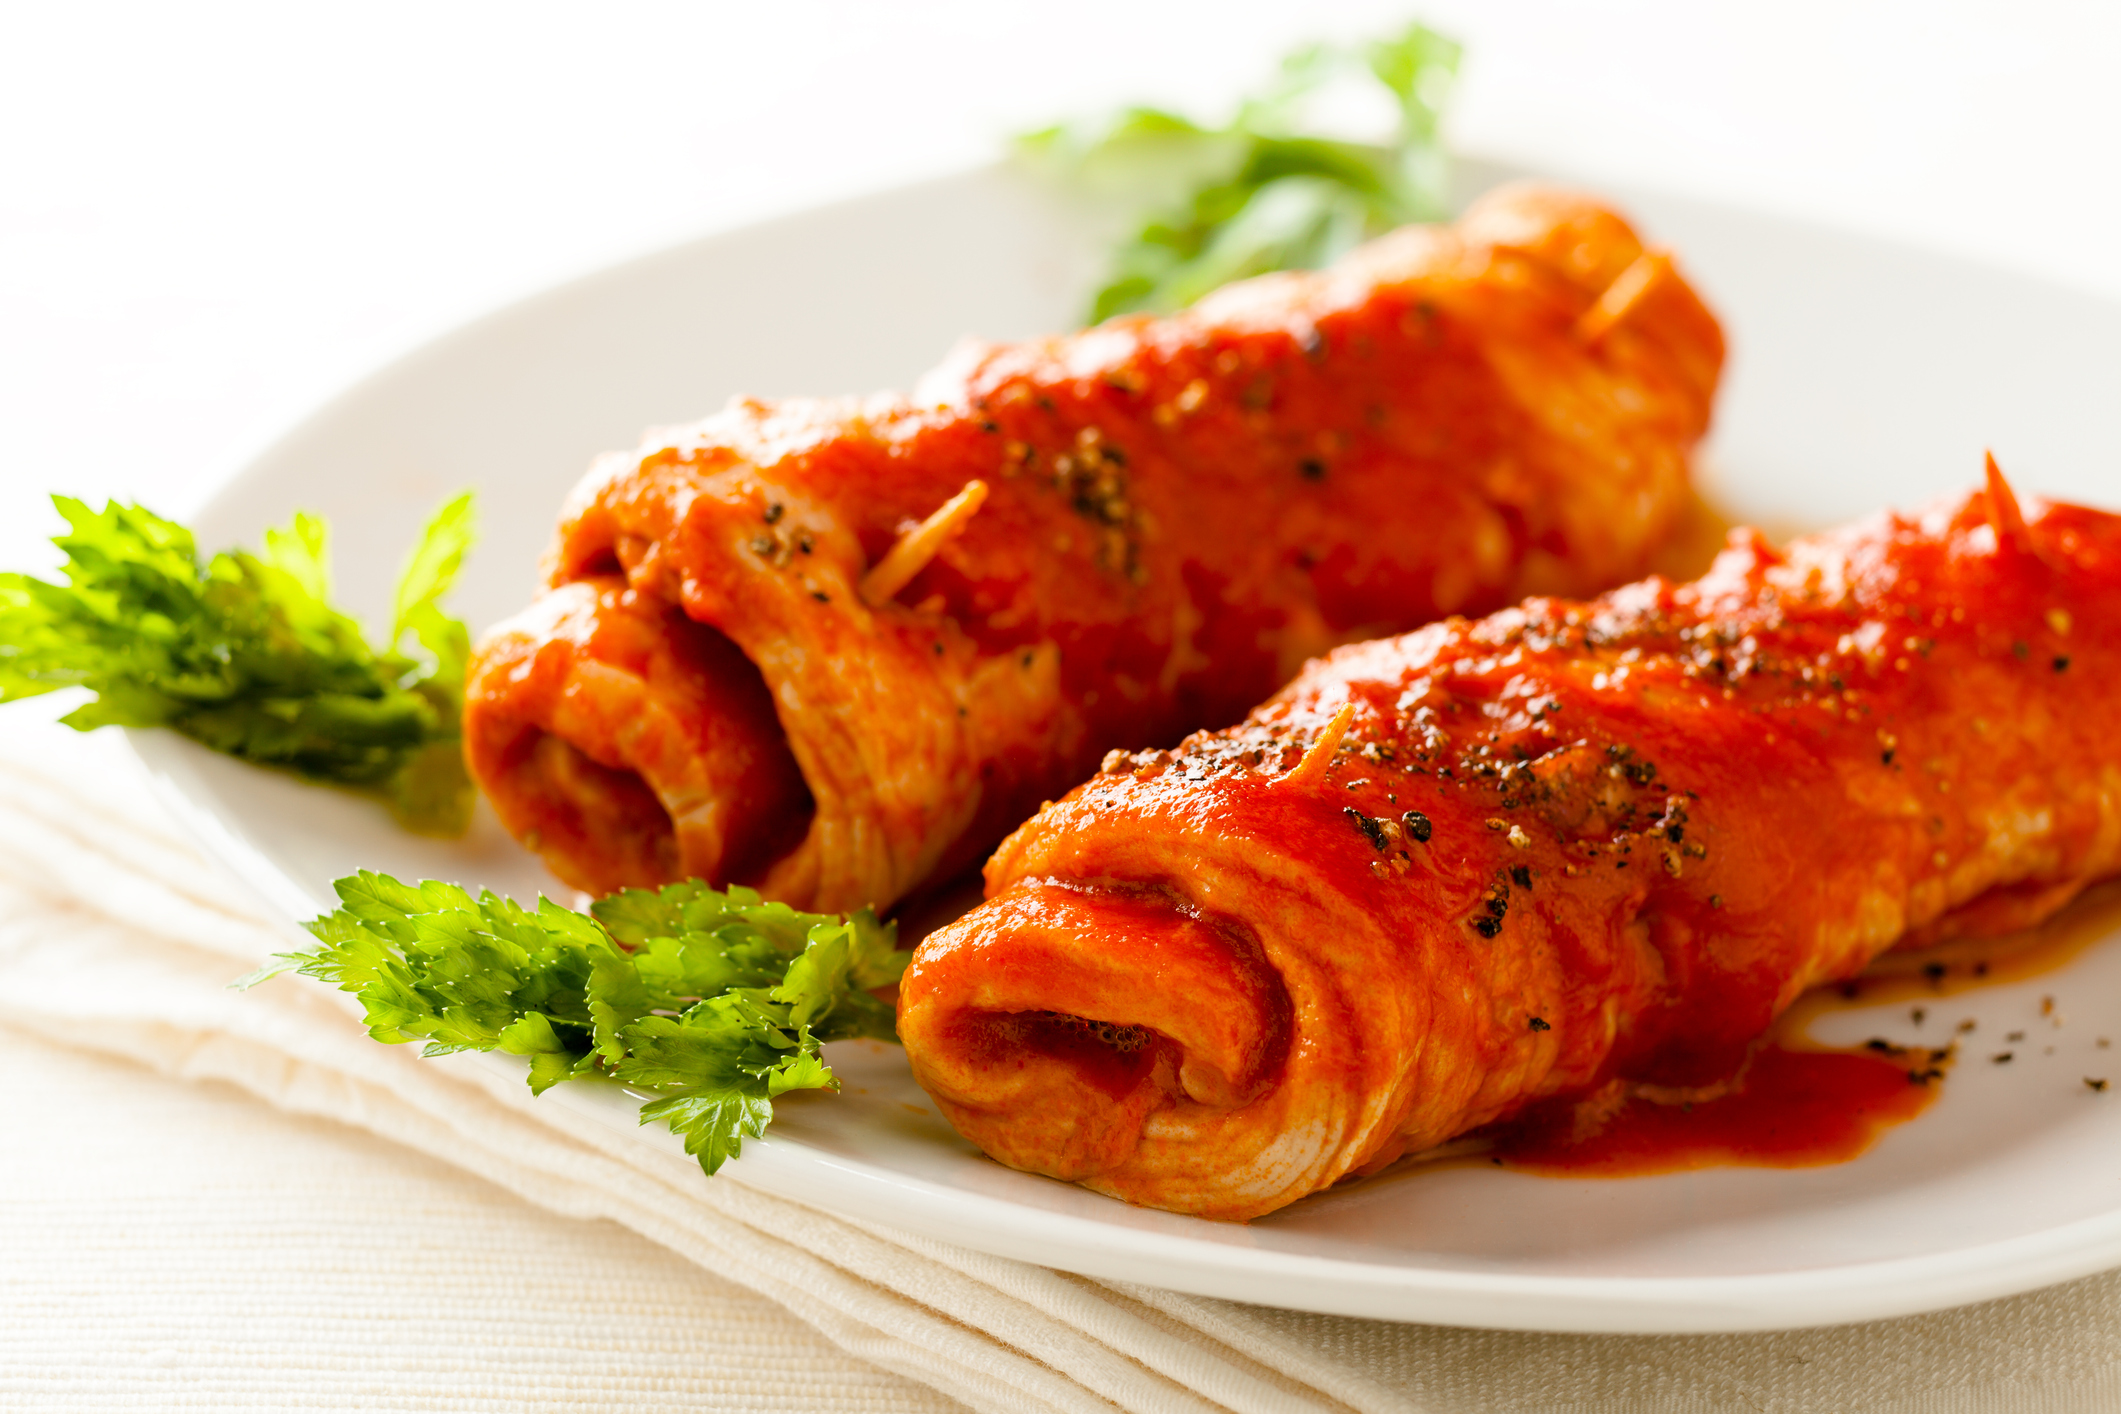 Braciole: Italian Cooking at Its Finest